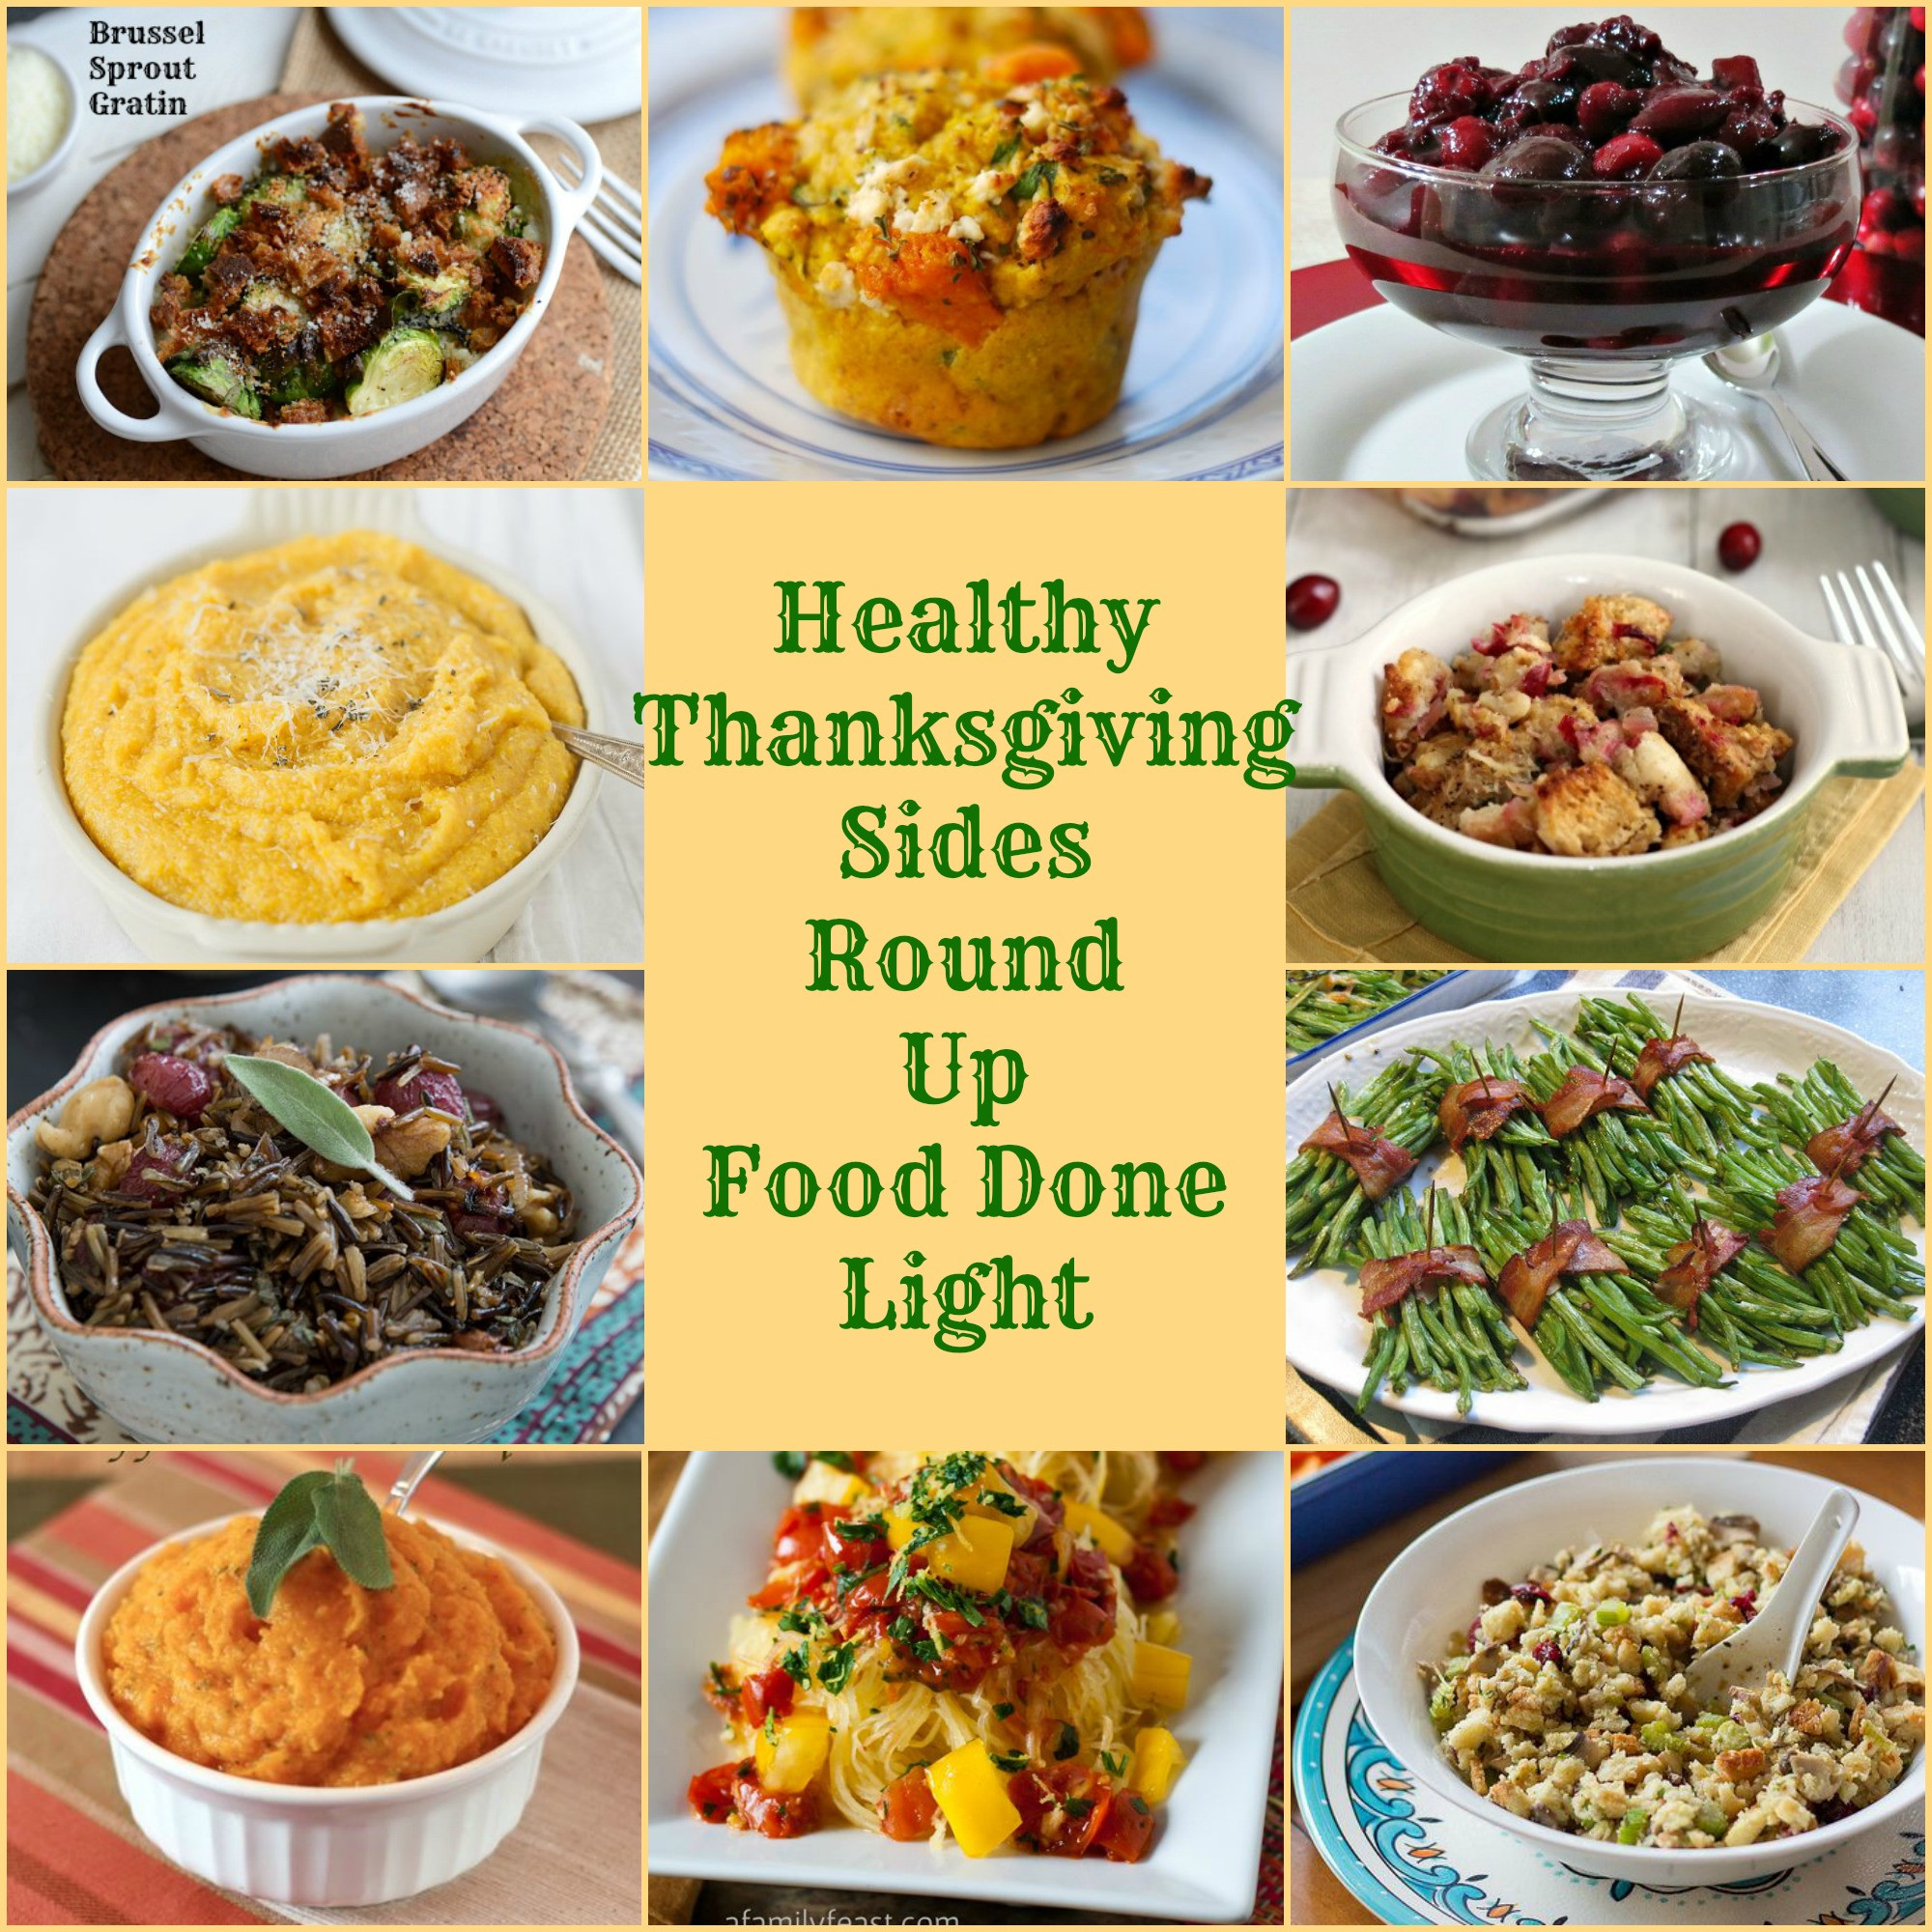 Healthy Thanksgiving Side Dish Recipes
 Healthy Thanksgiving Sides Recipe Round Up Food Done Light